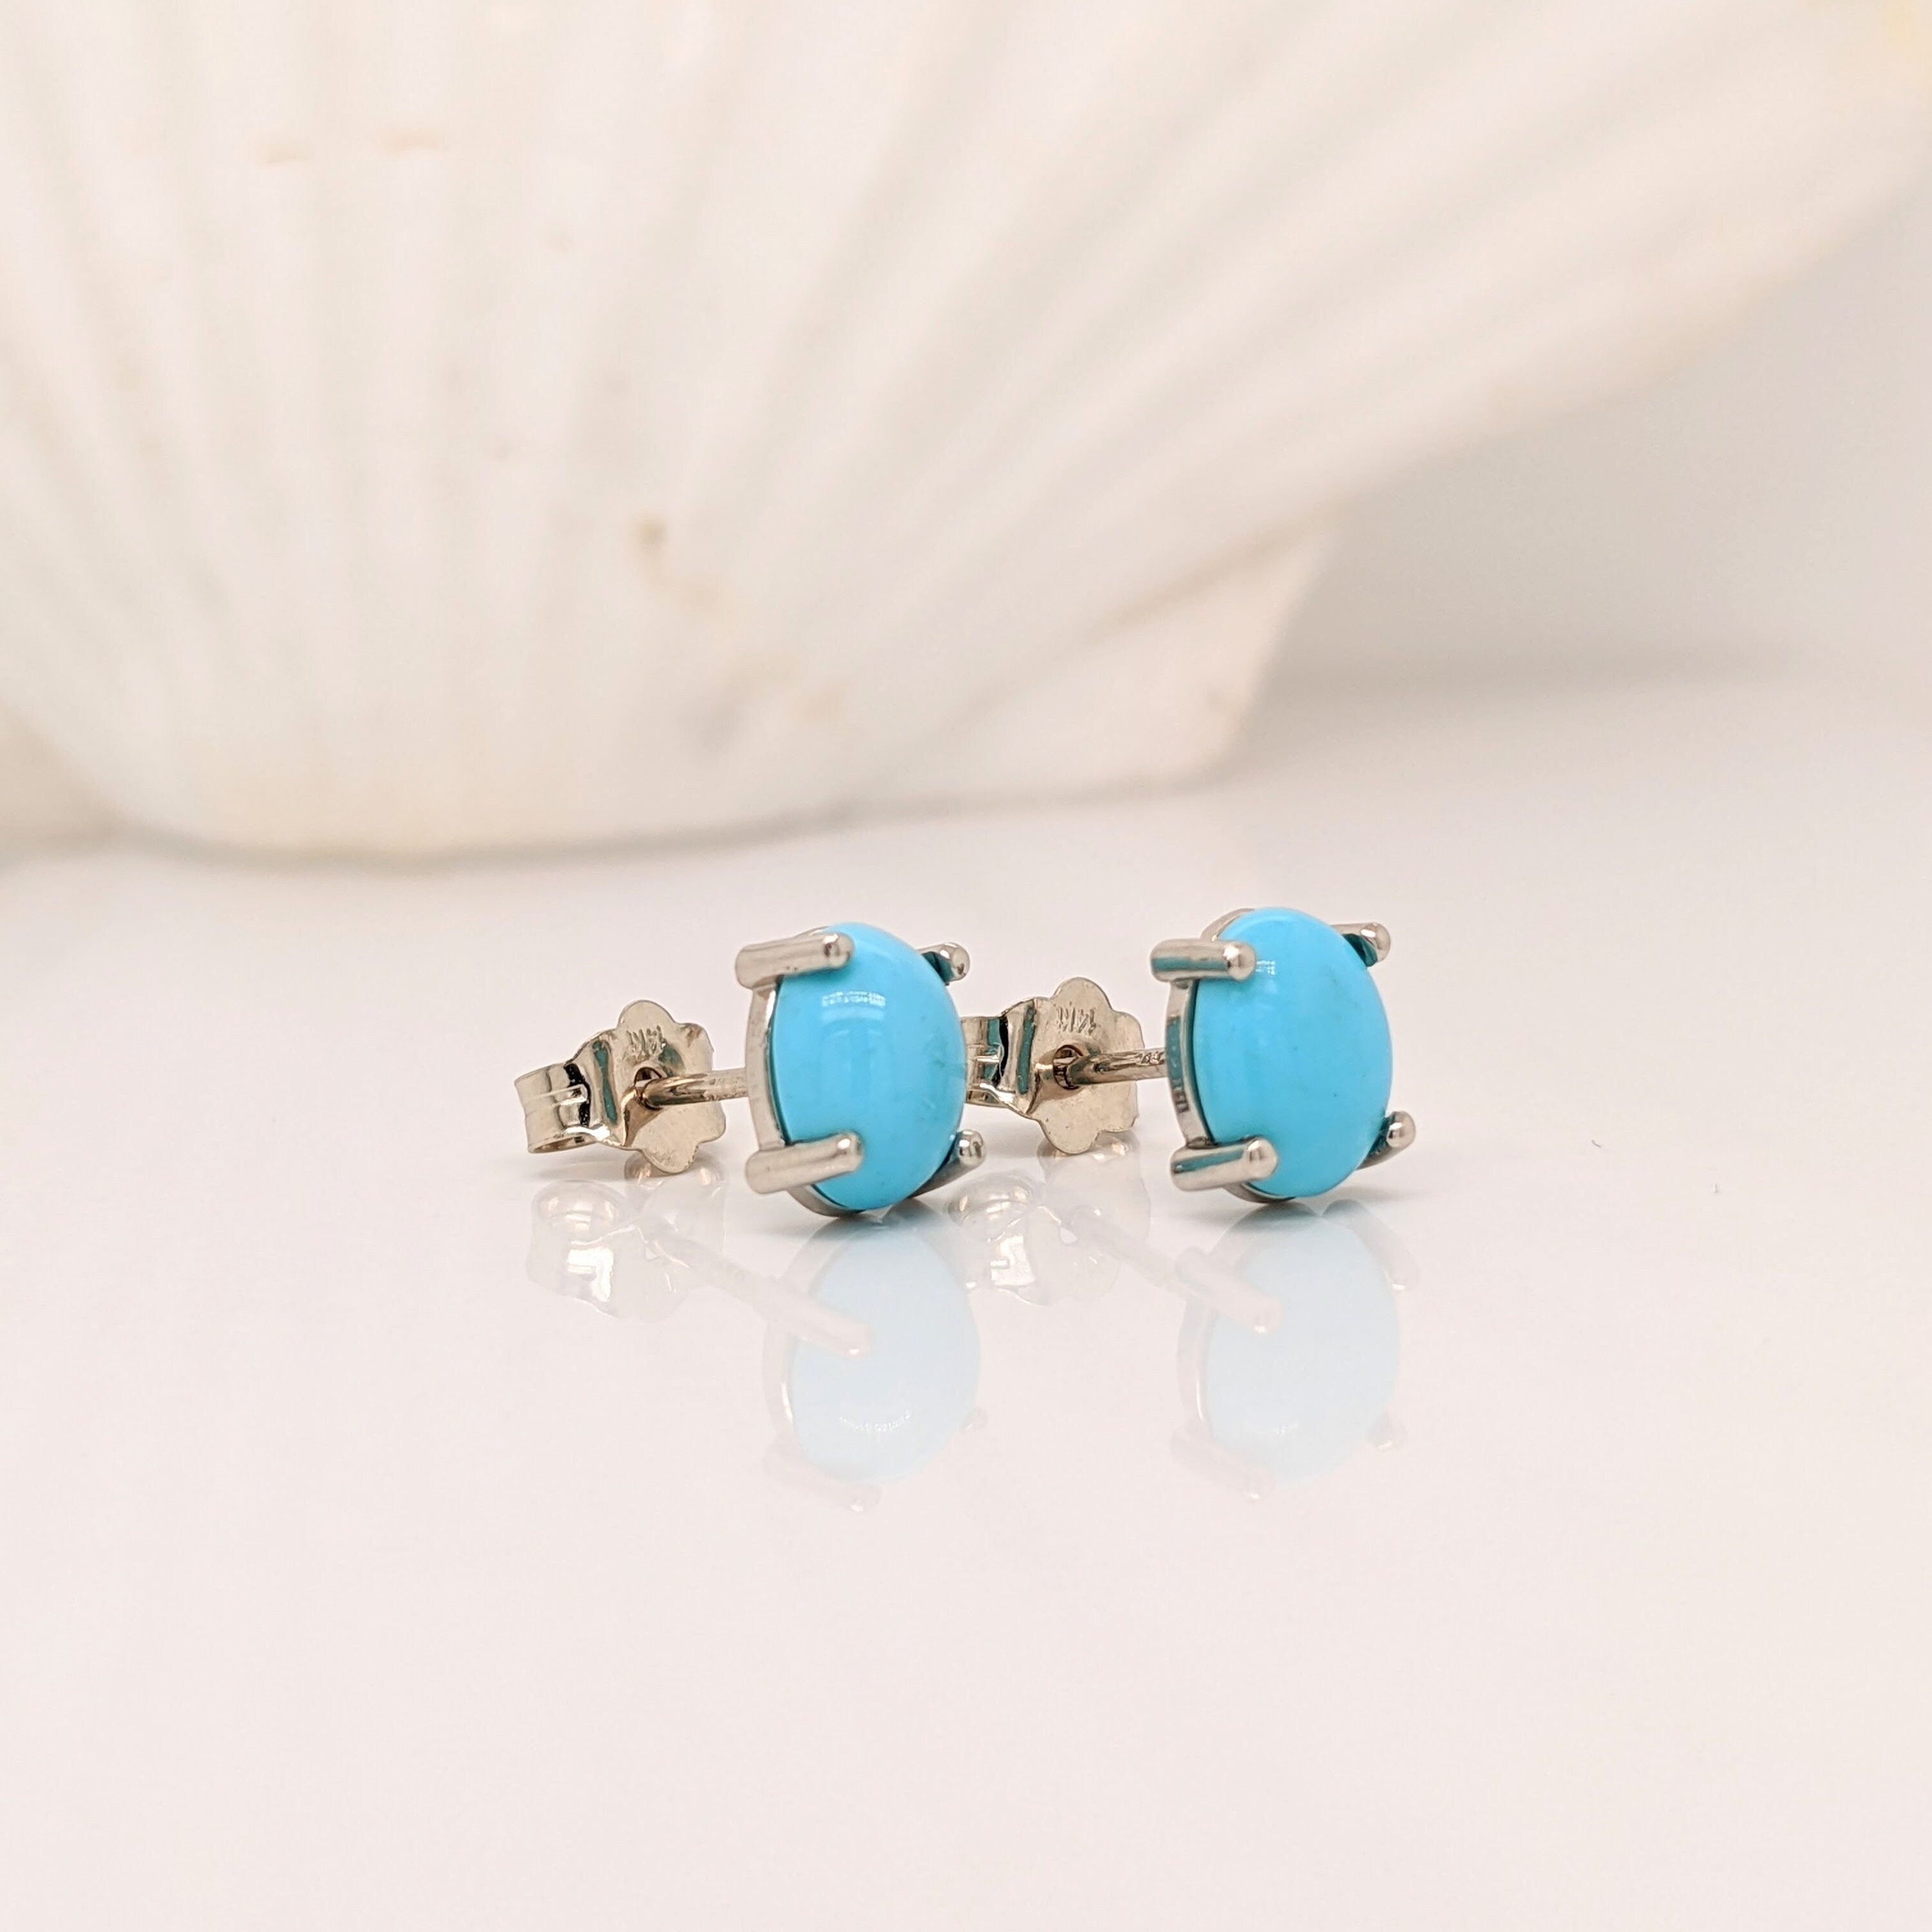 Cute Turquoise Earrings in Solid 14k Gold with Push Back Closures | Oval 8x6mm 7x5mm | Prong Setting | Cabochon Turquoise | Customizable